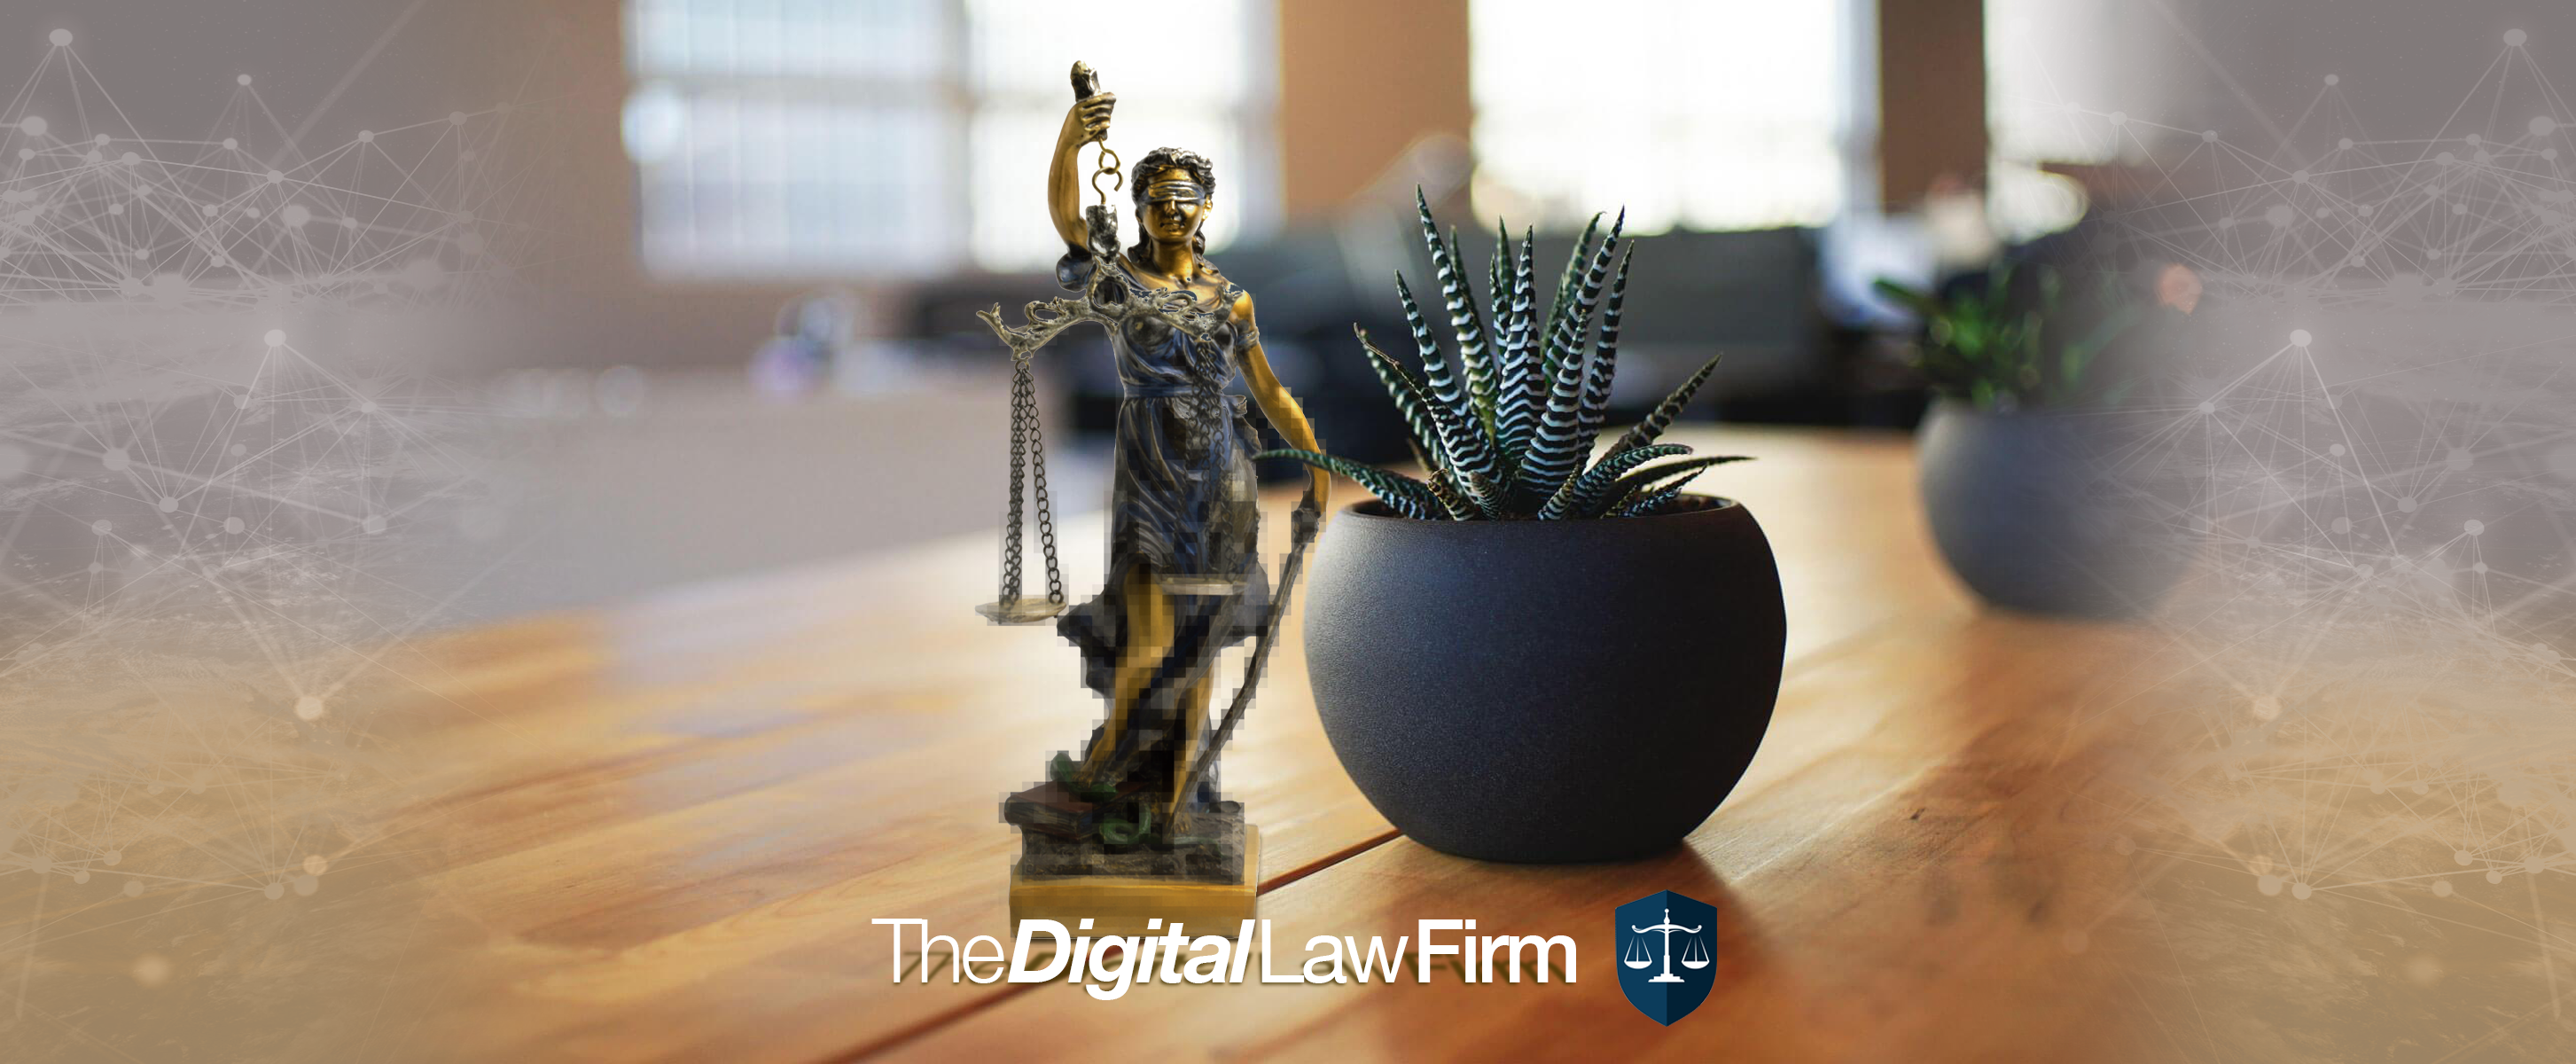 The Digital Law Firm